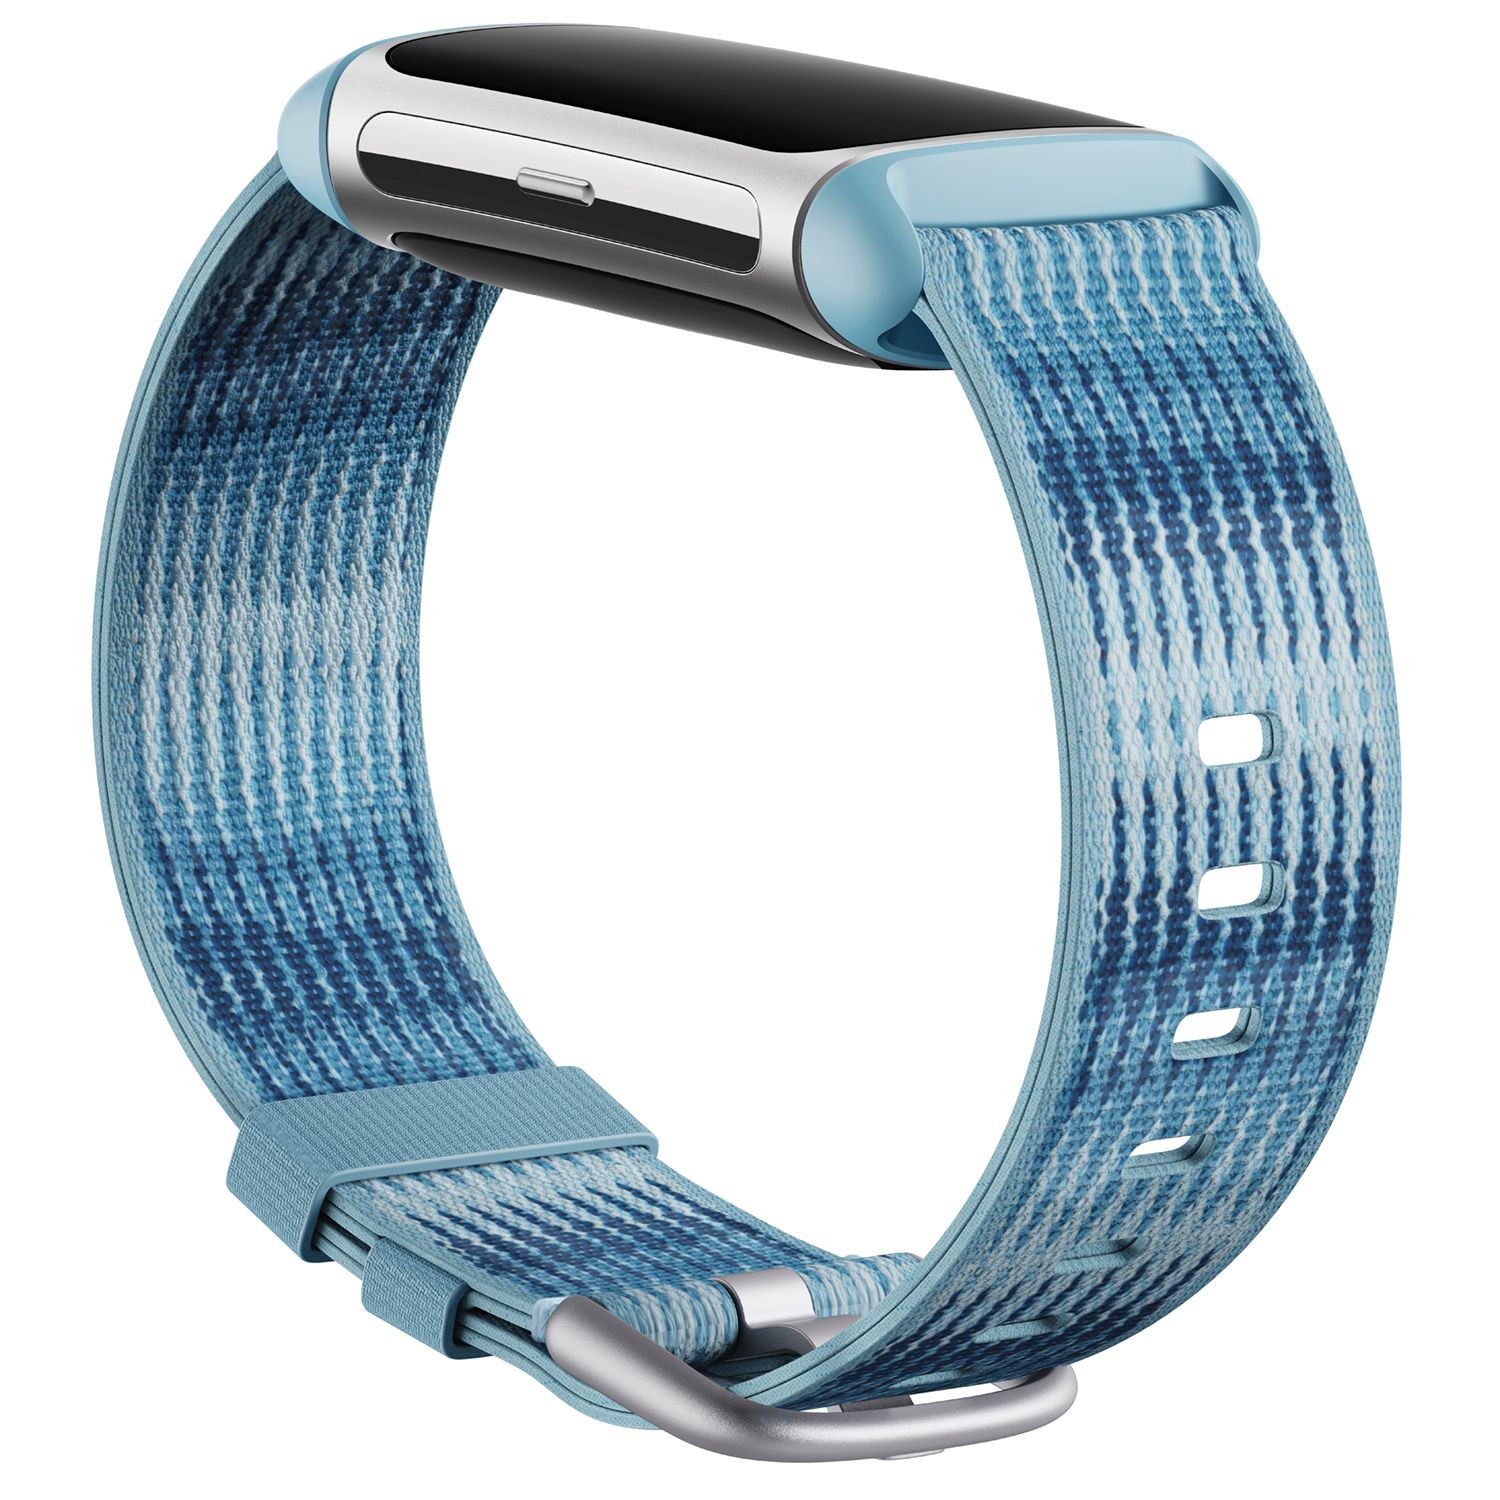 Does the Fitbit Charge 6 use standard watch bands?